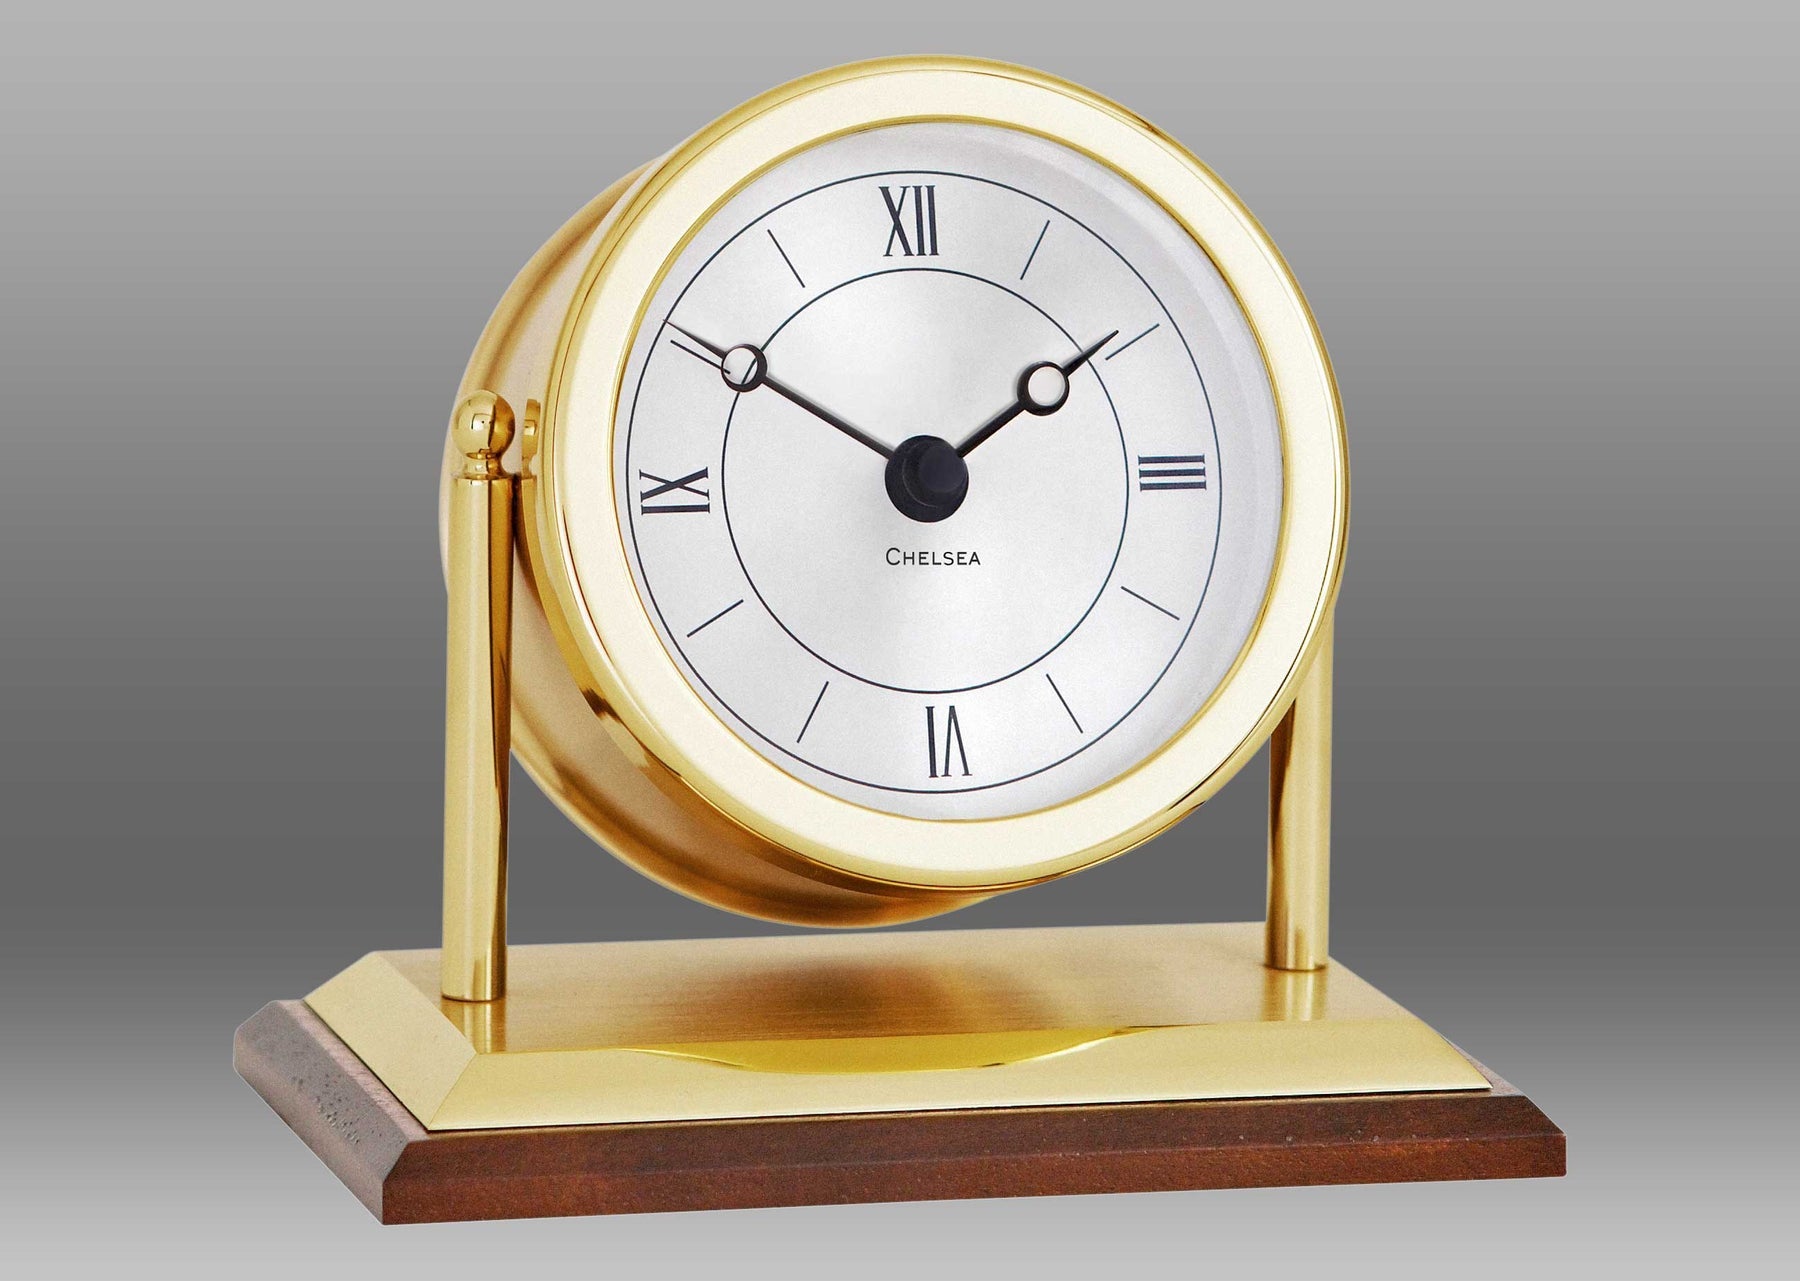 A gold clock with a white face Description automatically generated